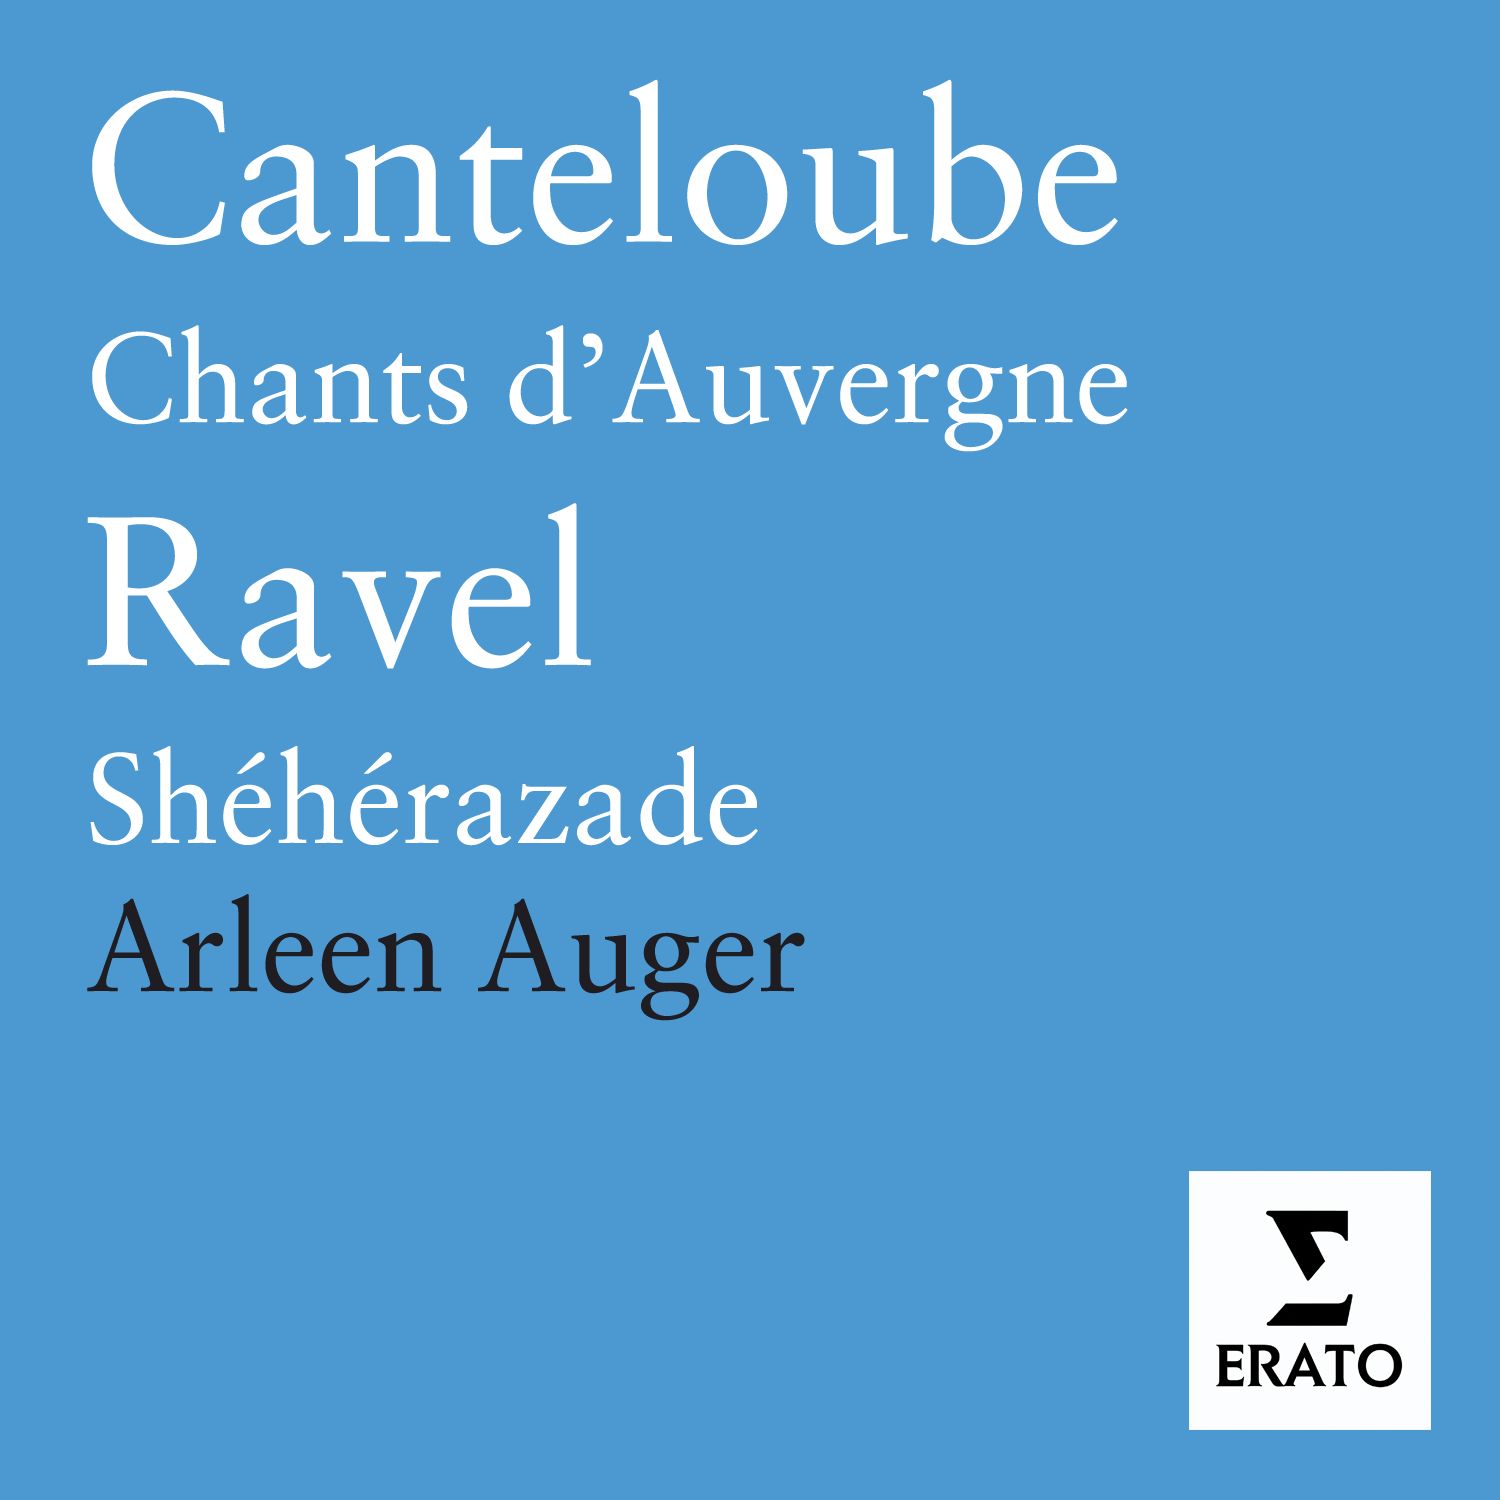 Music by Canteloube & Ravel